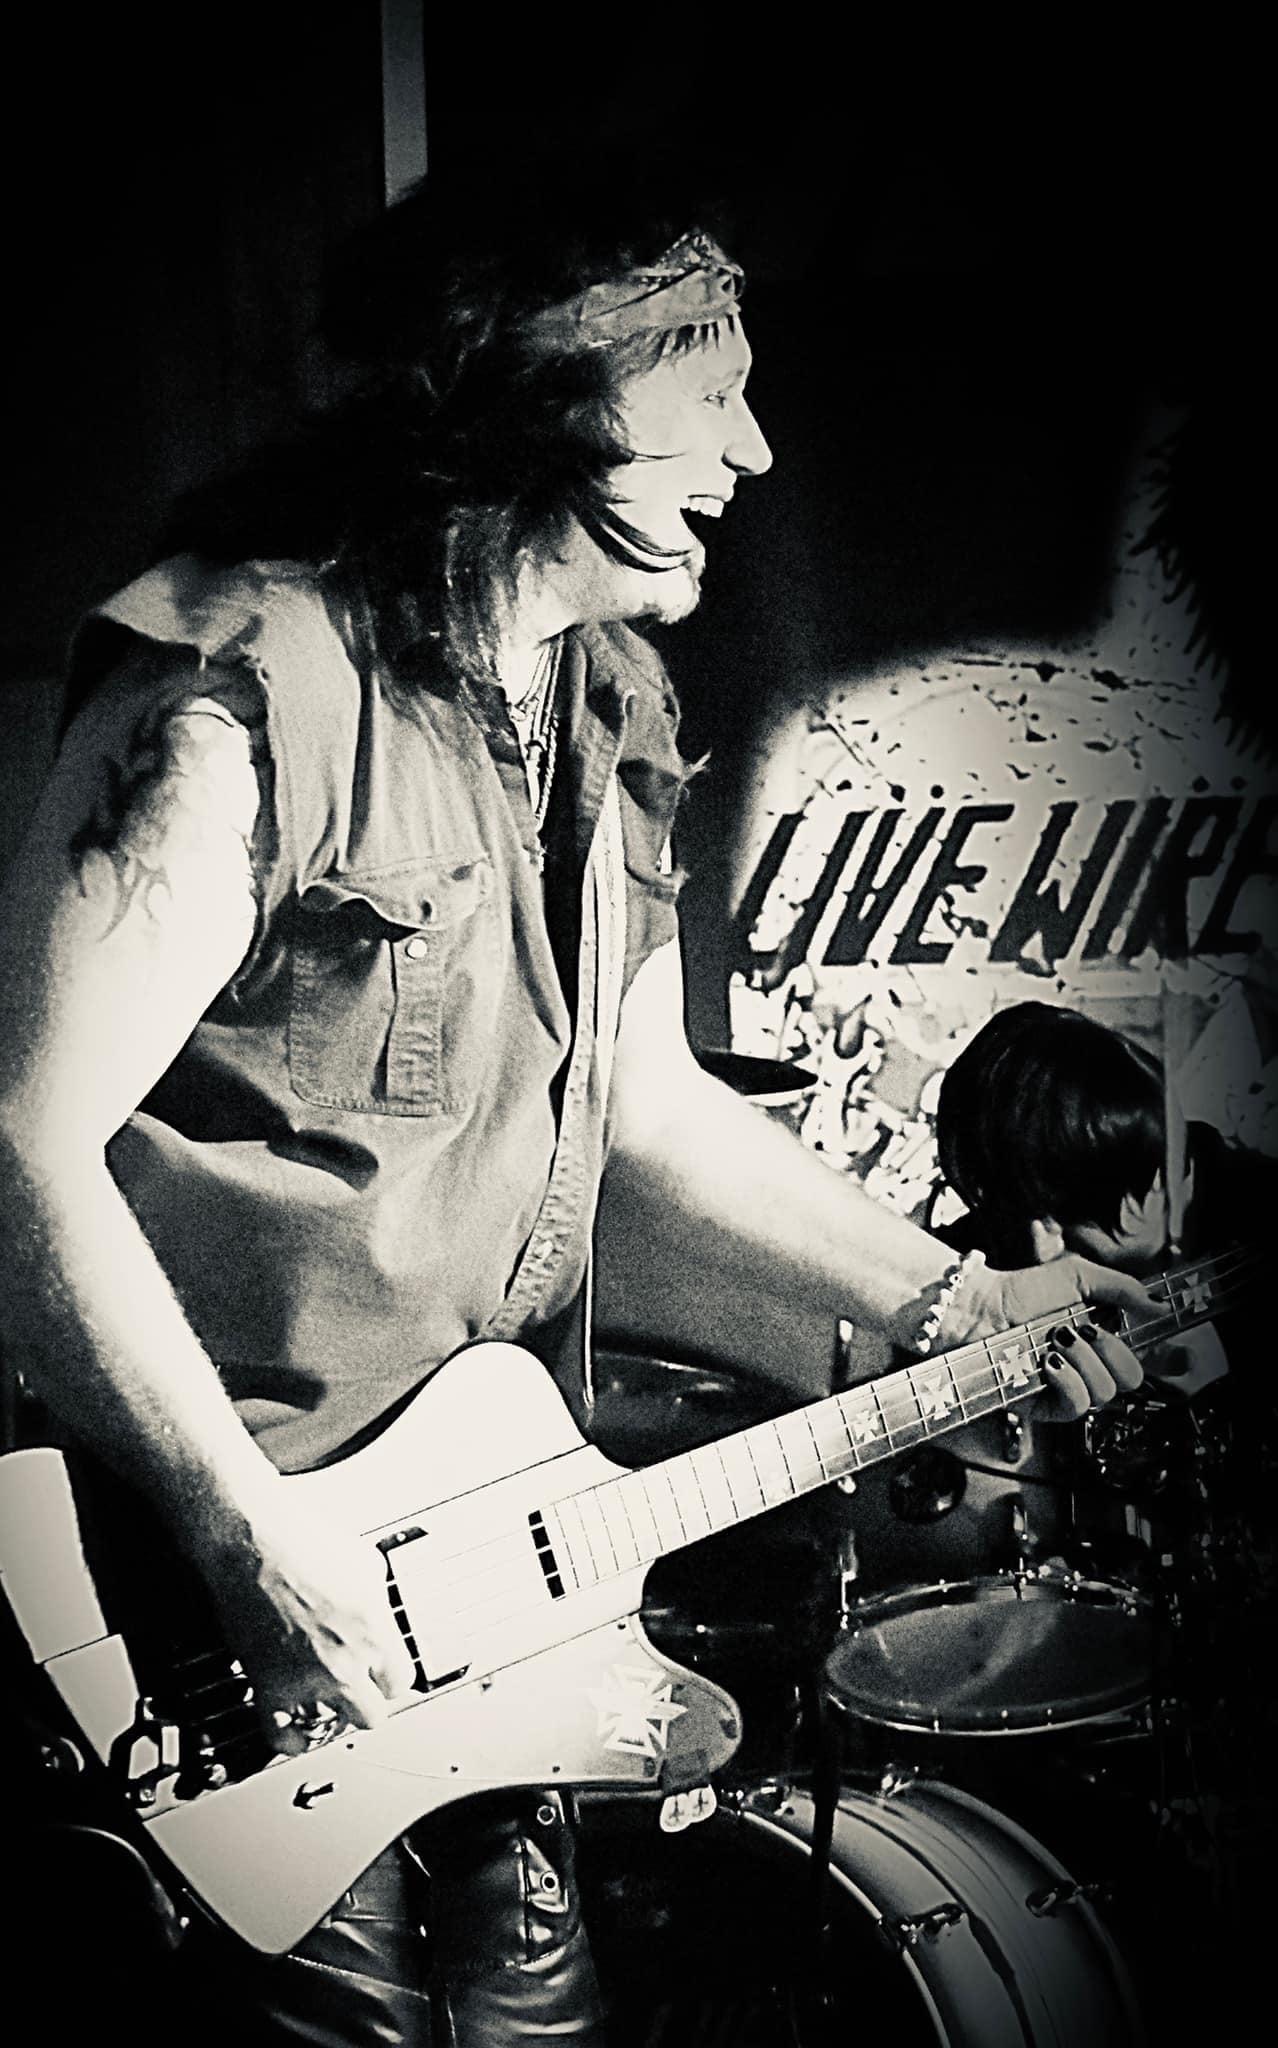 Live Wire, The #1 Motley Crue Tribute Band - Band in Arsenal PA 